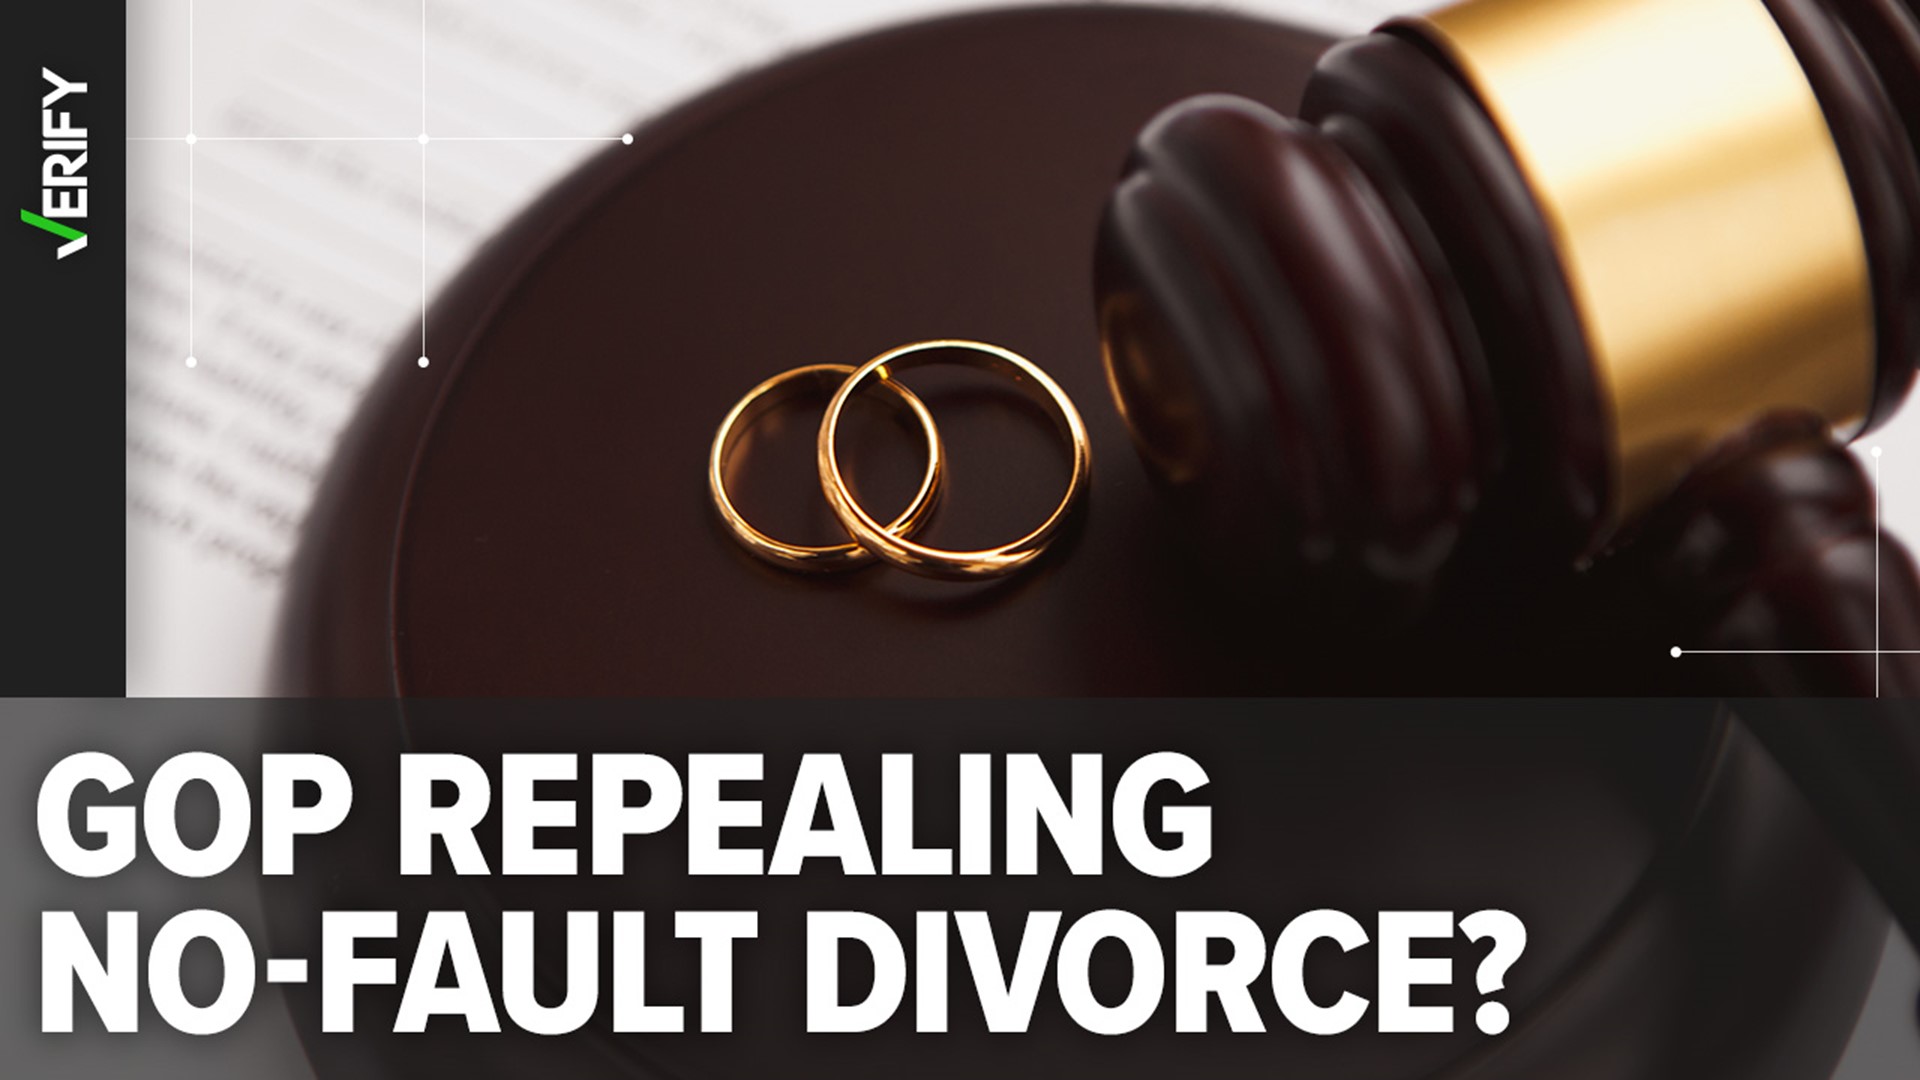 Viral posts claim some Republican lawmakers are looking to eliminate no-fault divorce. We VERIFY what no-fault divorce is and what’s happening in states.